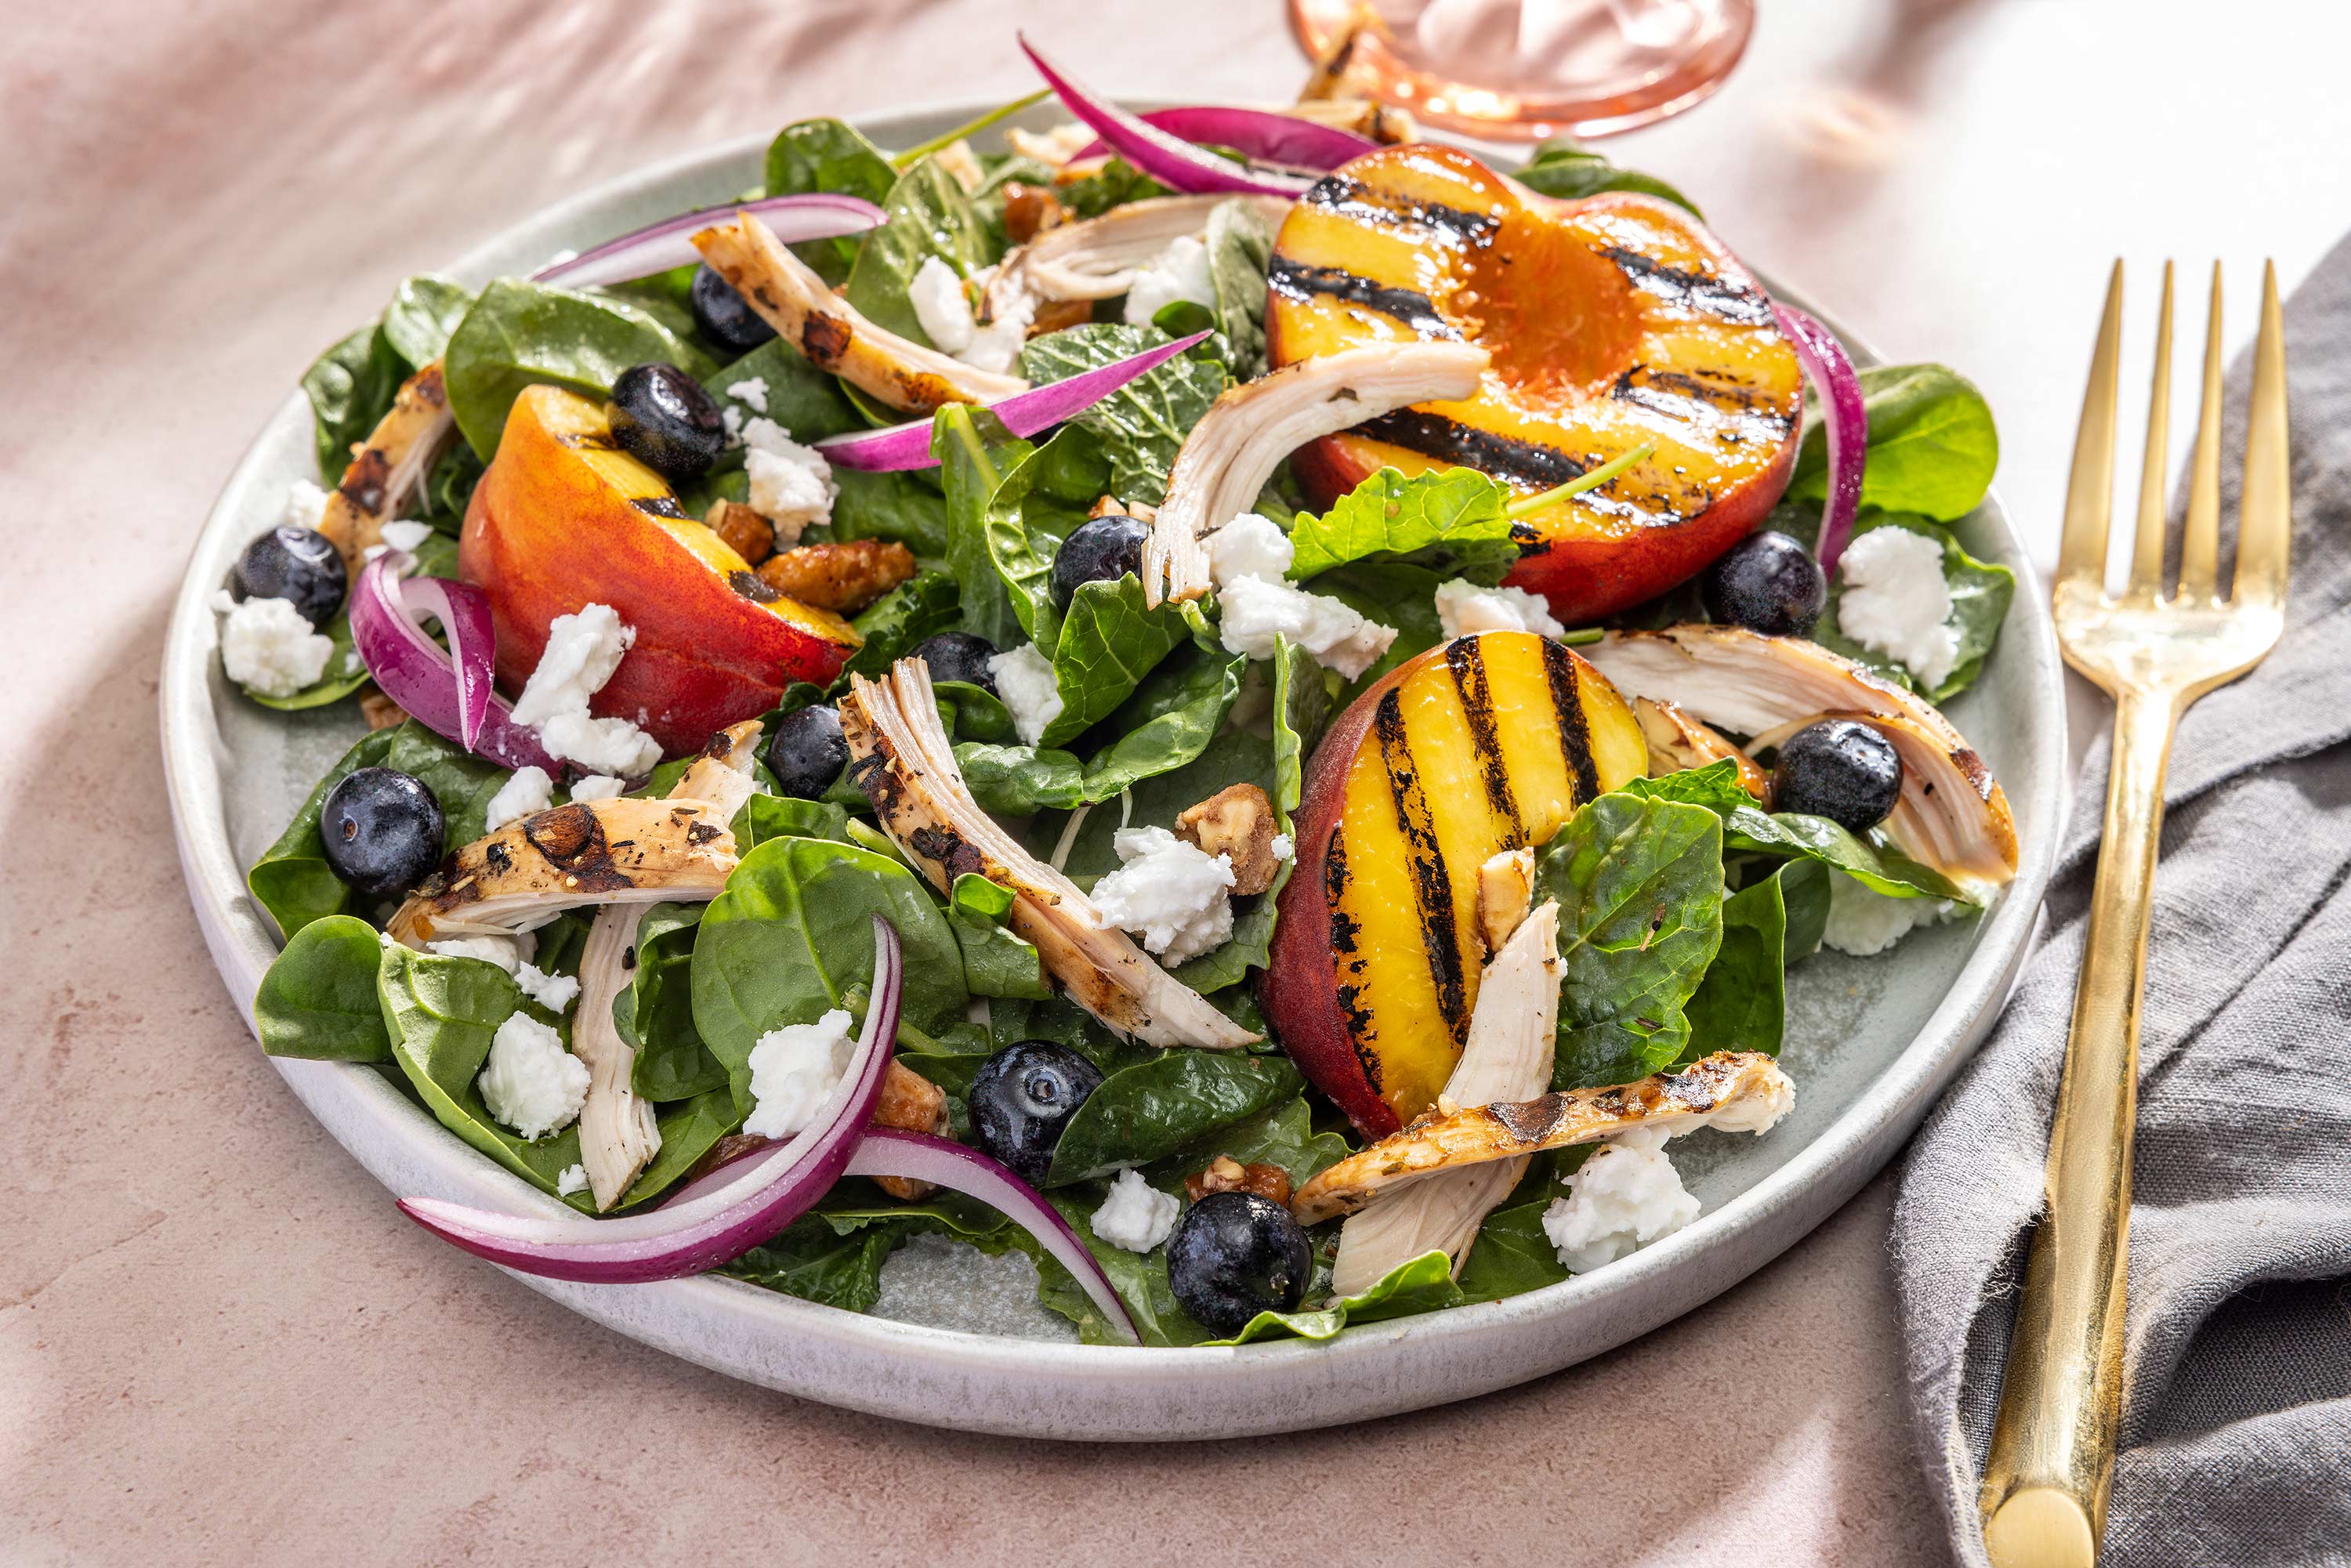 Grilled peach summer salad with feta and red onions shot at 3/4 angle.